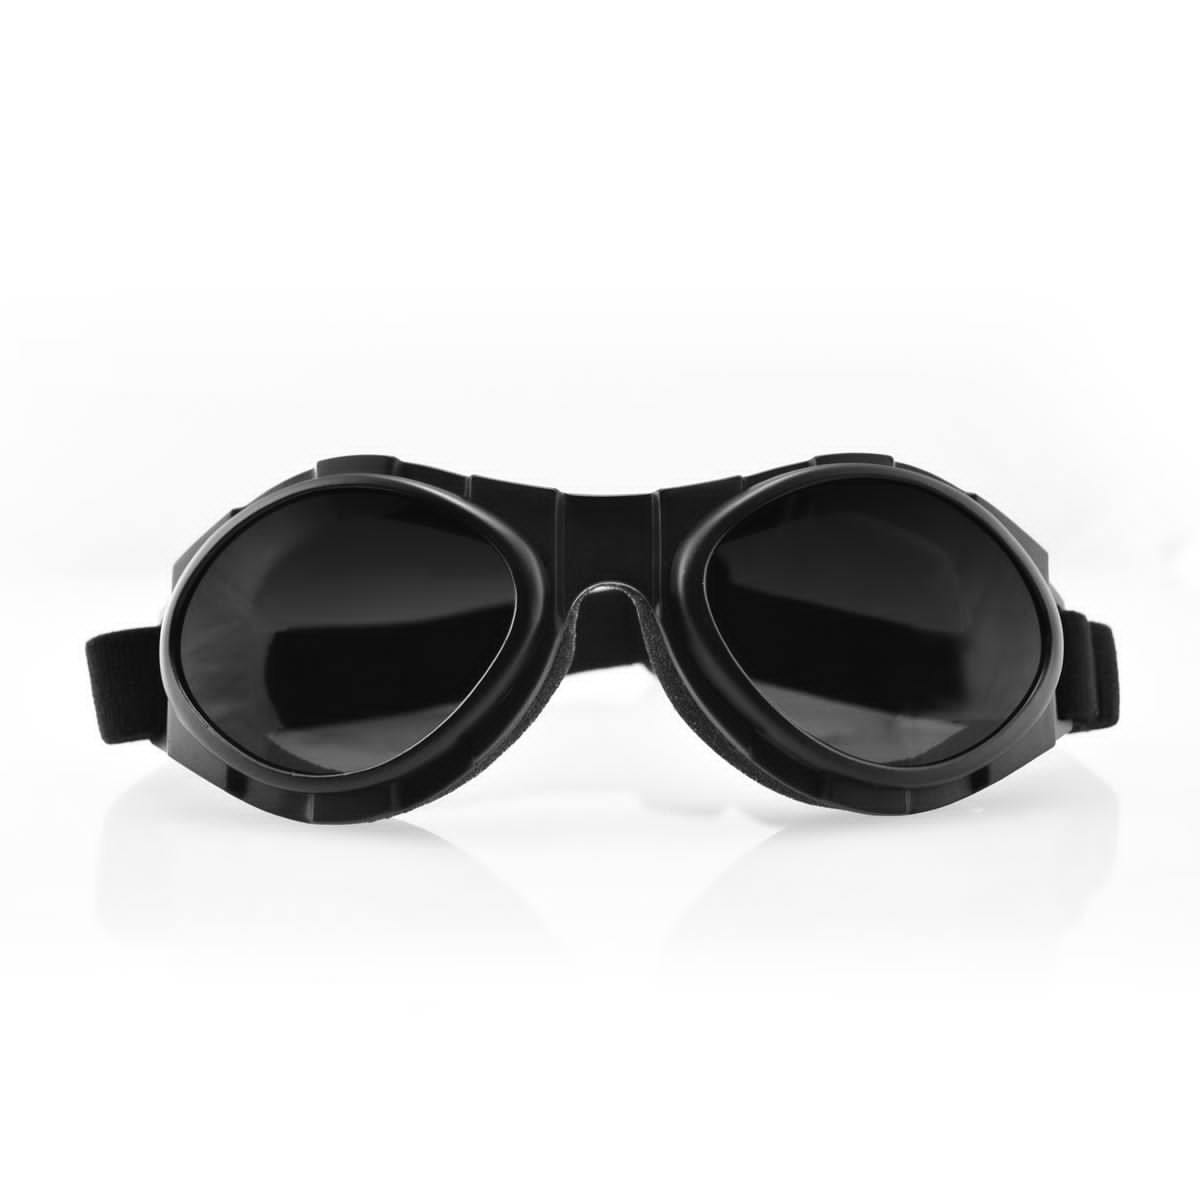 Bobster Bugeye II Interchangeable RX Ready Goggles - American Legend Rider